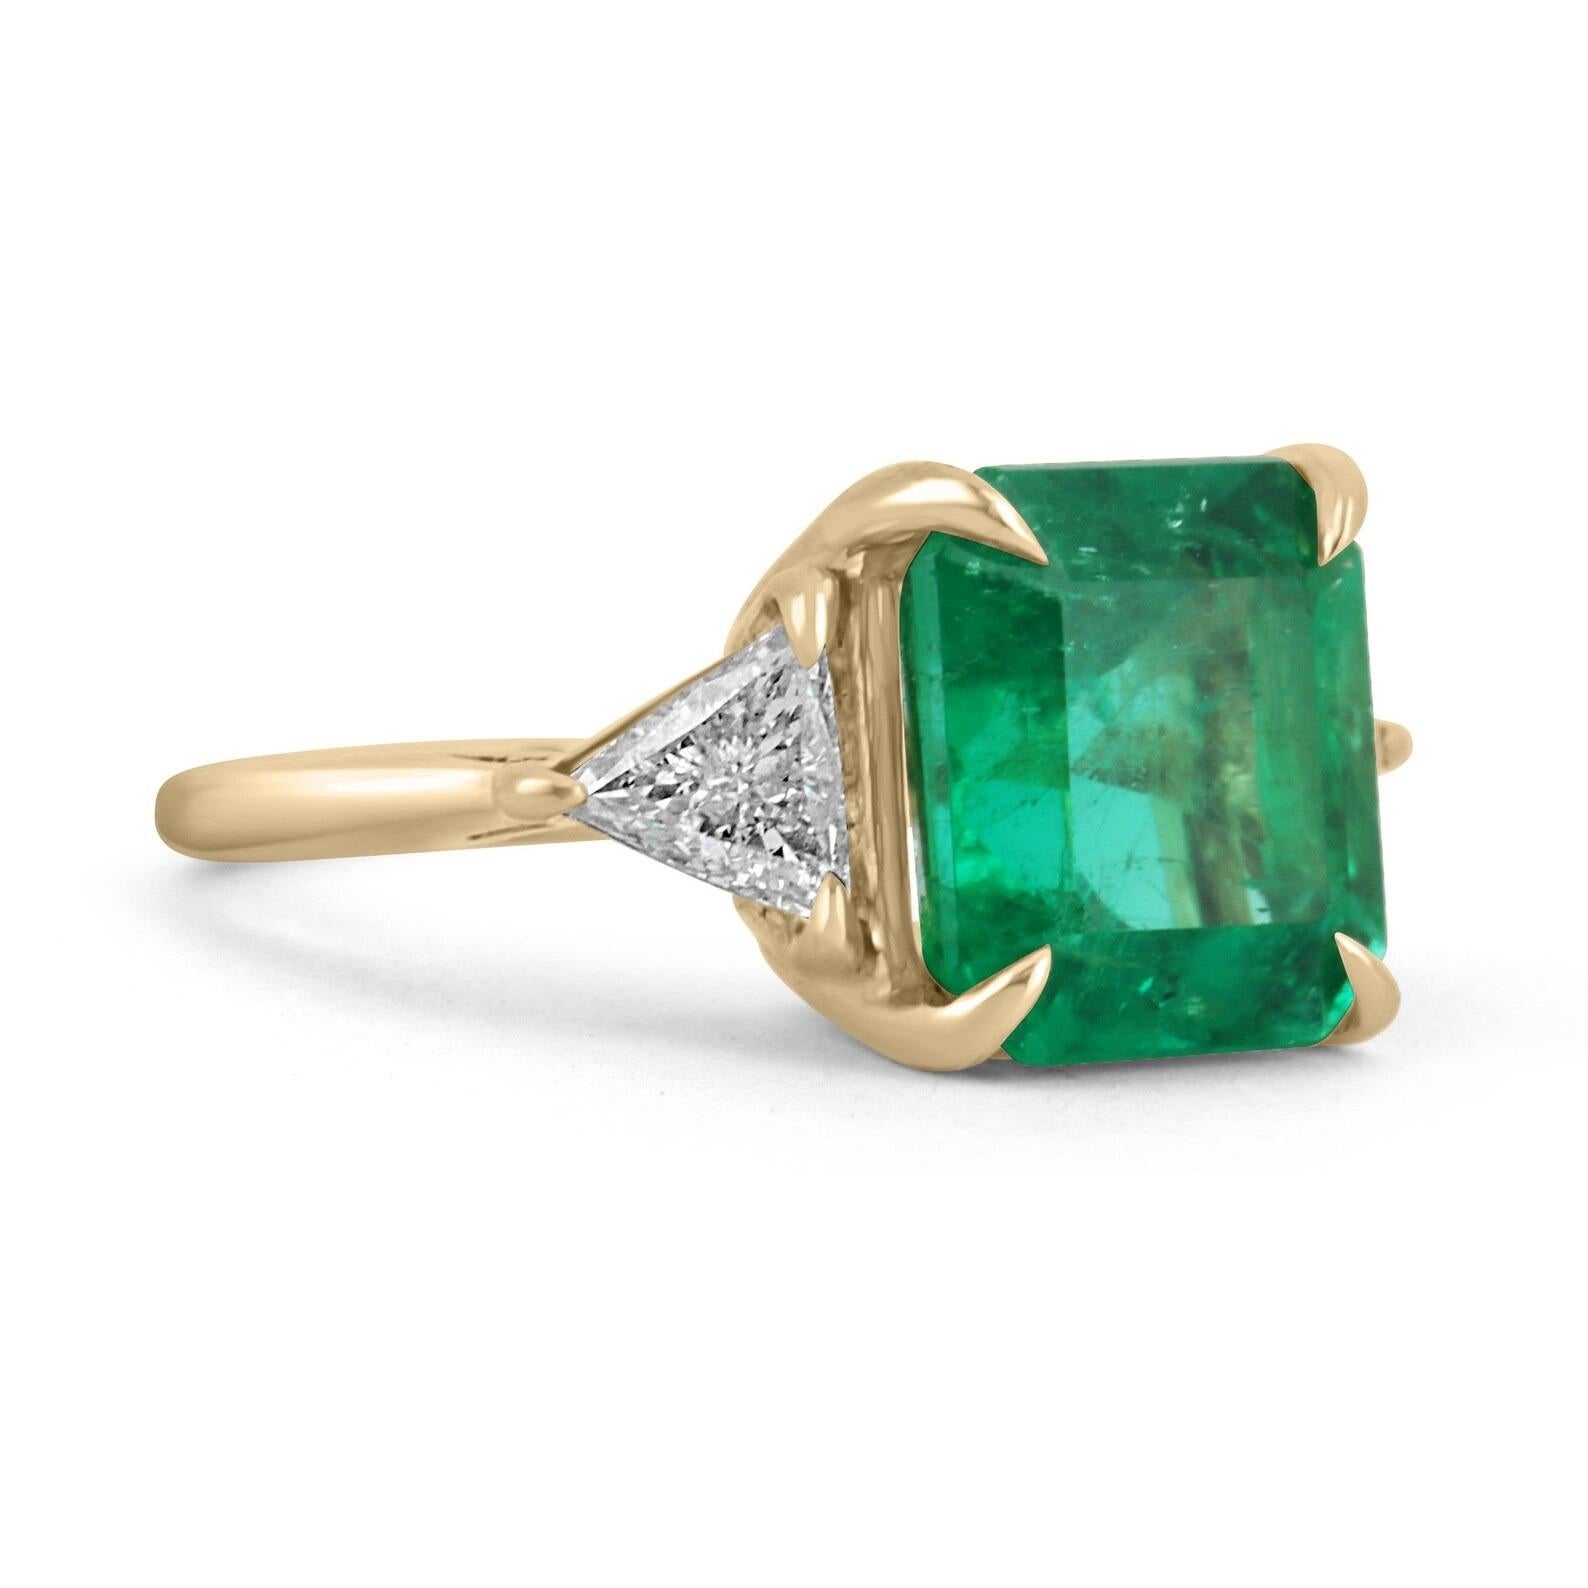 This is a grand AAA top-quality Colombian emerald and VS trillion diamond three-stone ring. Dexterously handcrafted in gleaming solid 18K gold this ring features a natural Colombian emerald from the famous Muzo mines. Set in a secure prong setting,